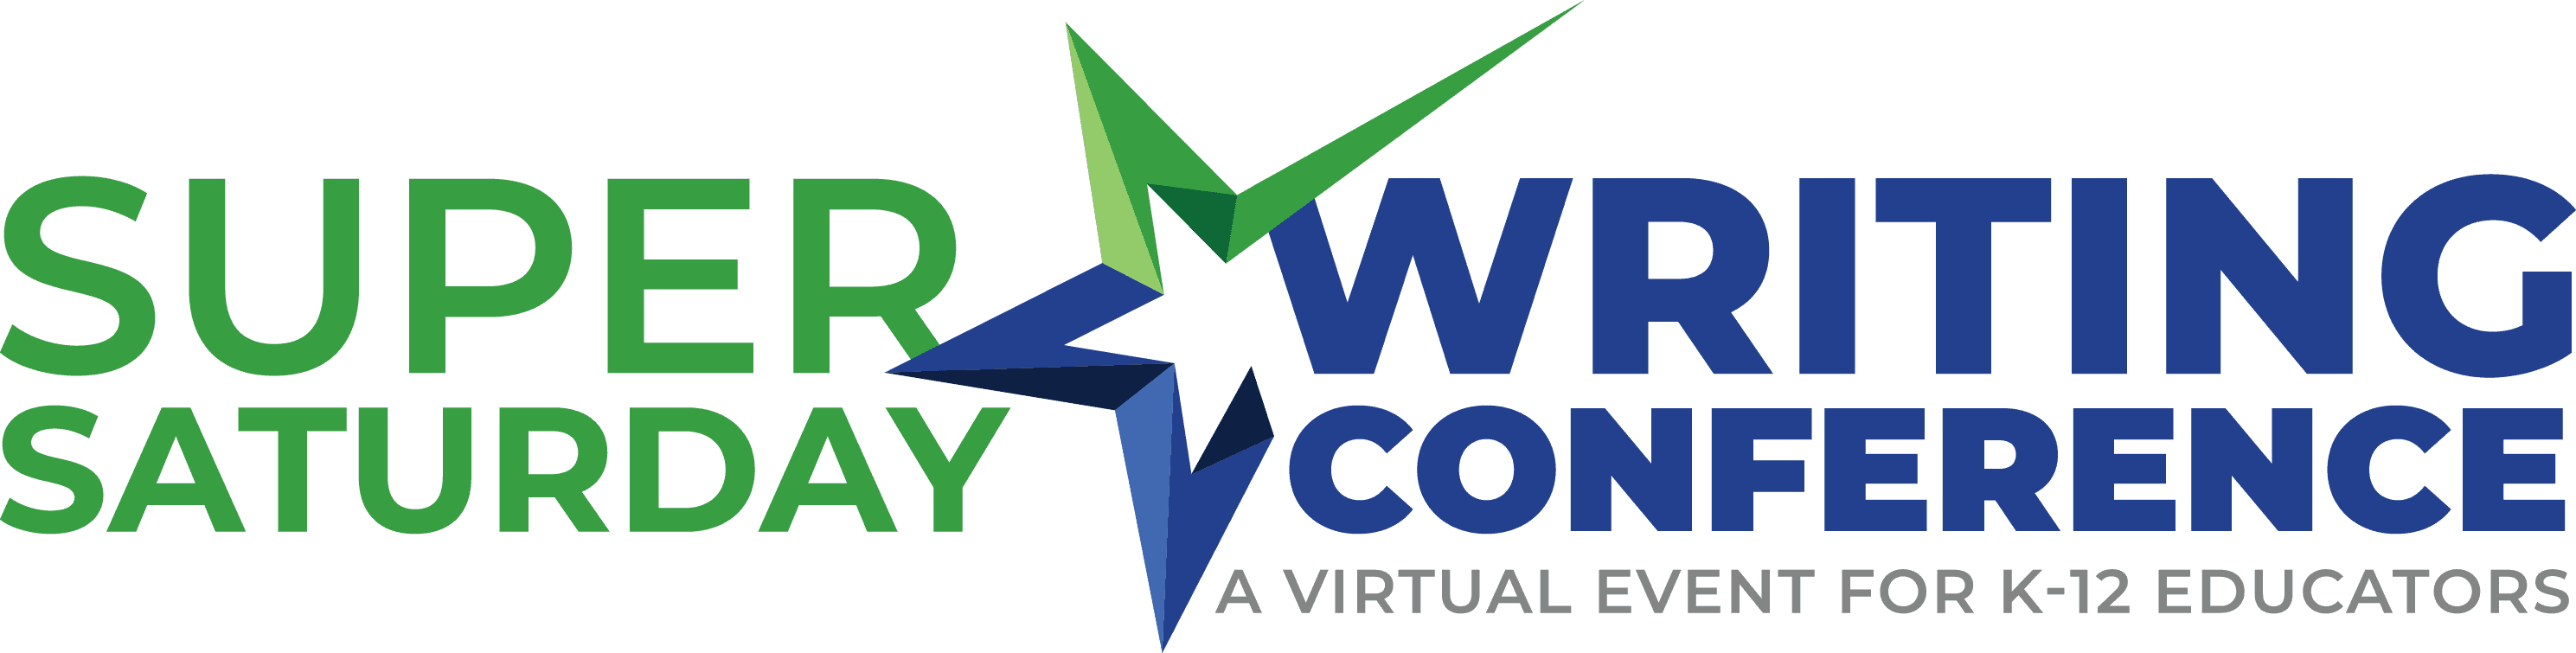 Super Saturday Writing Conference: A Virtual Event for K-12 Educators